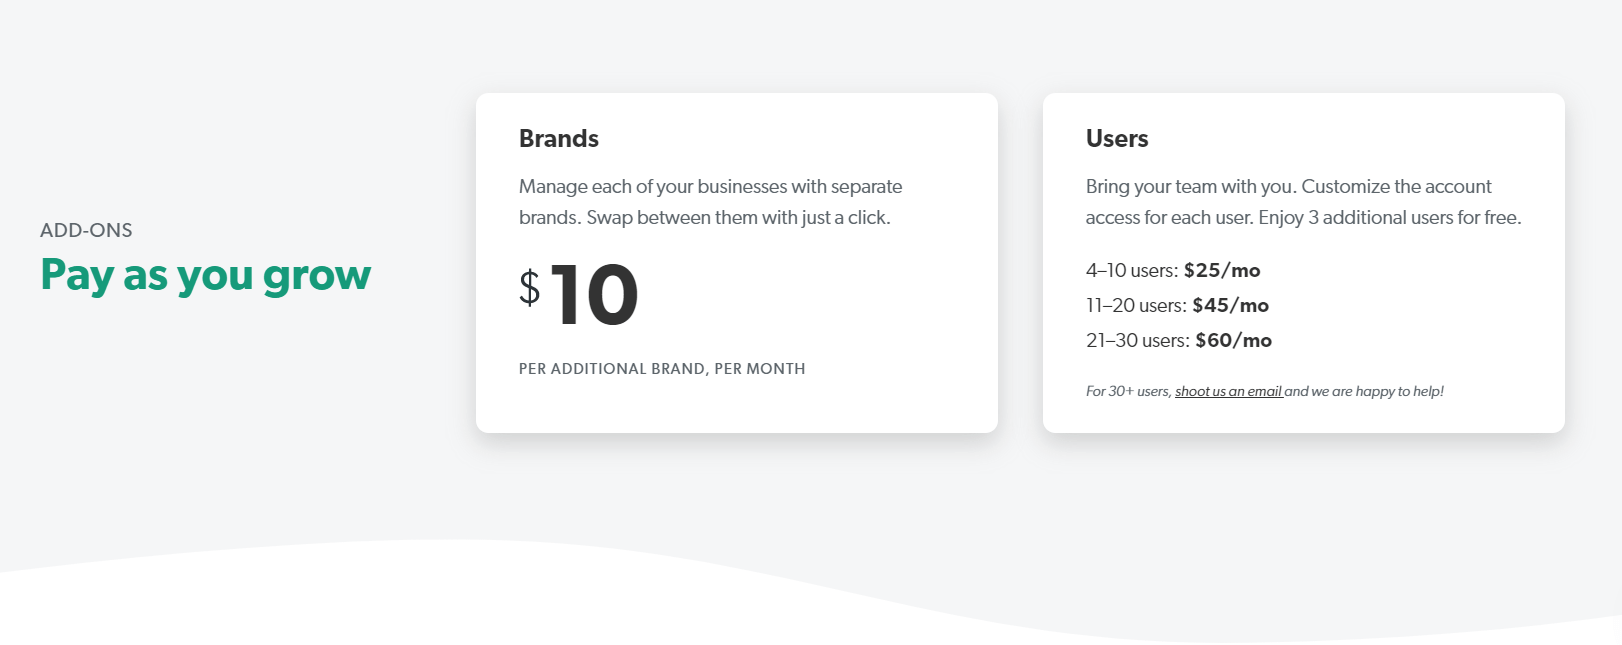 Screenshot of Dubsado Multi User and Brands pricing. Additional brands cost $10 while 4–10 users: $25/mo, 11–20 users: $45/mo, 21–30 users: $60/mo.